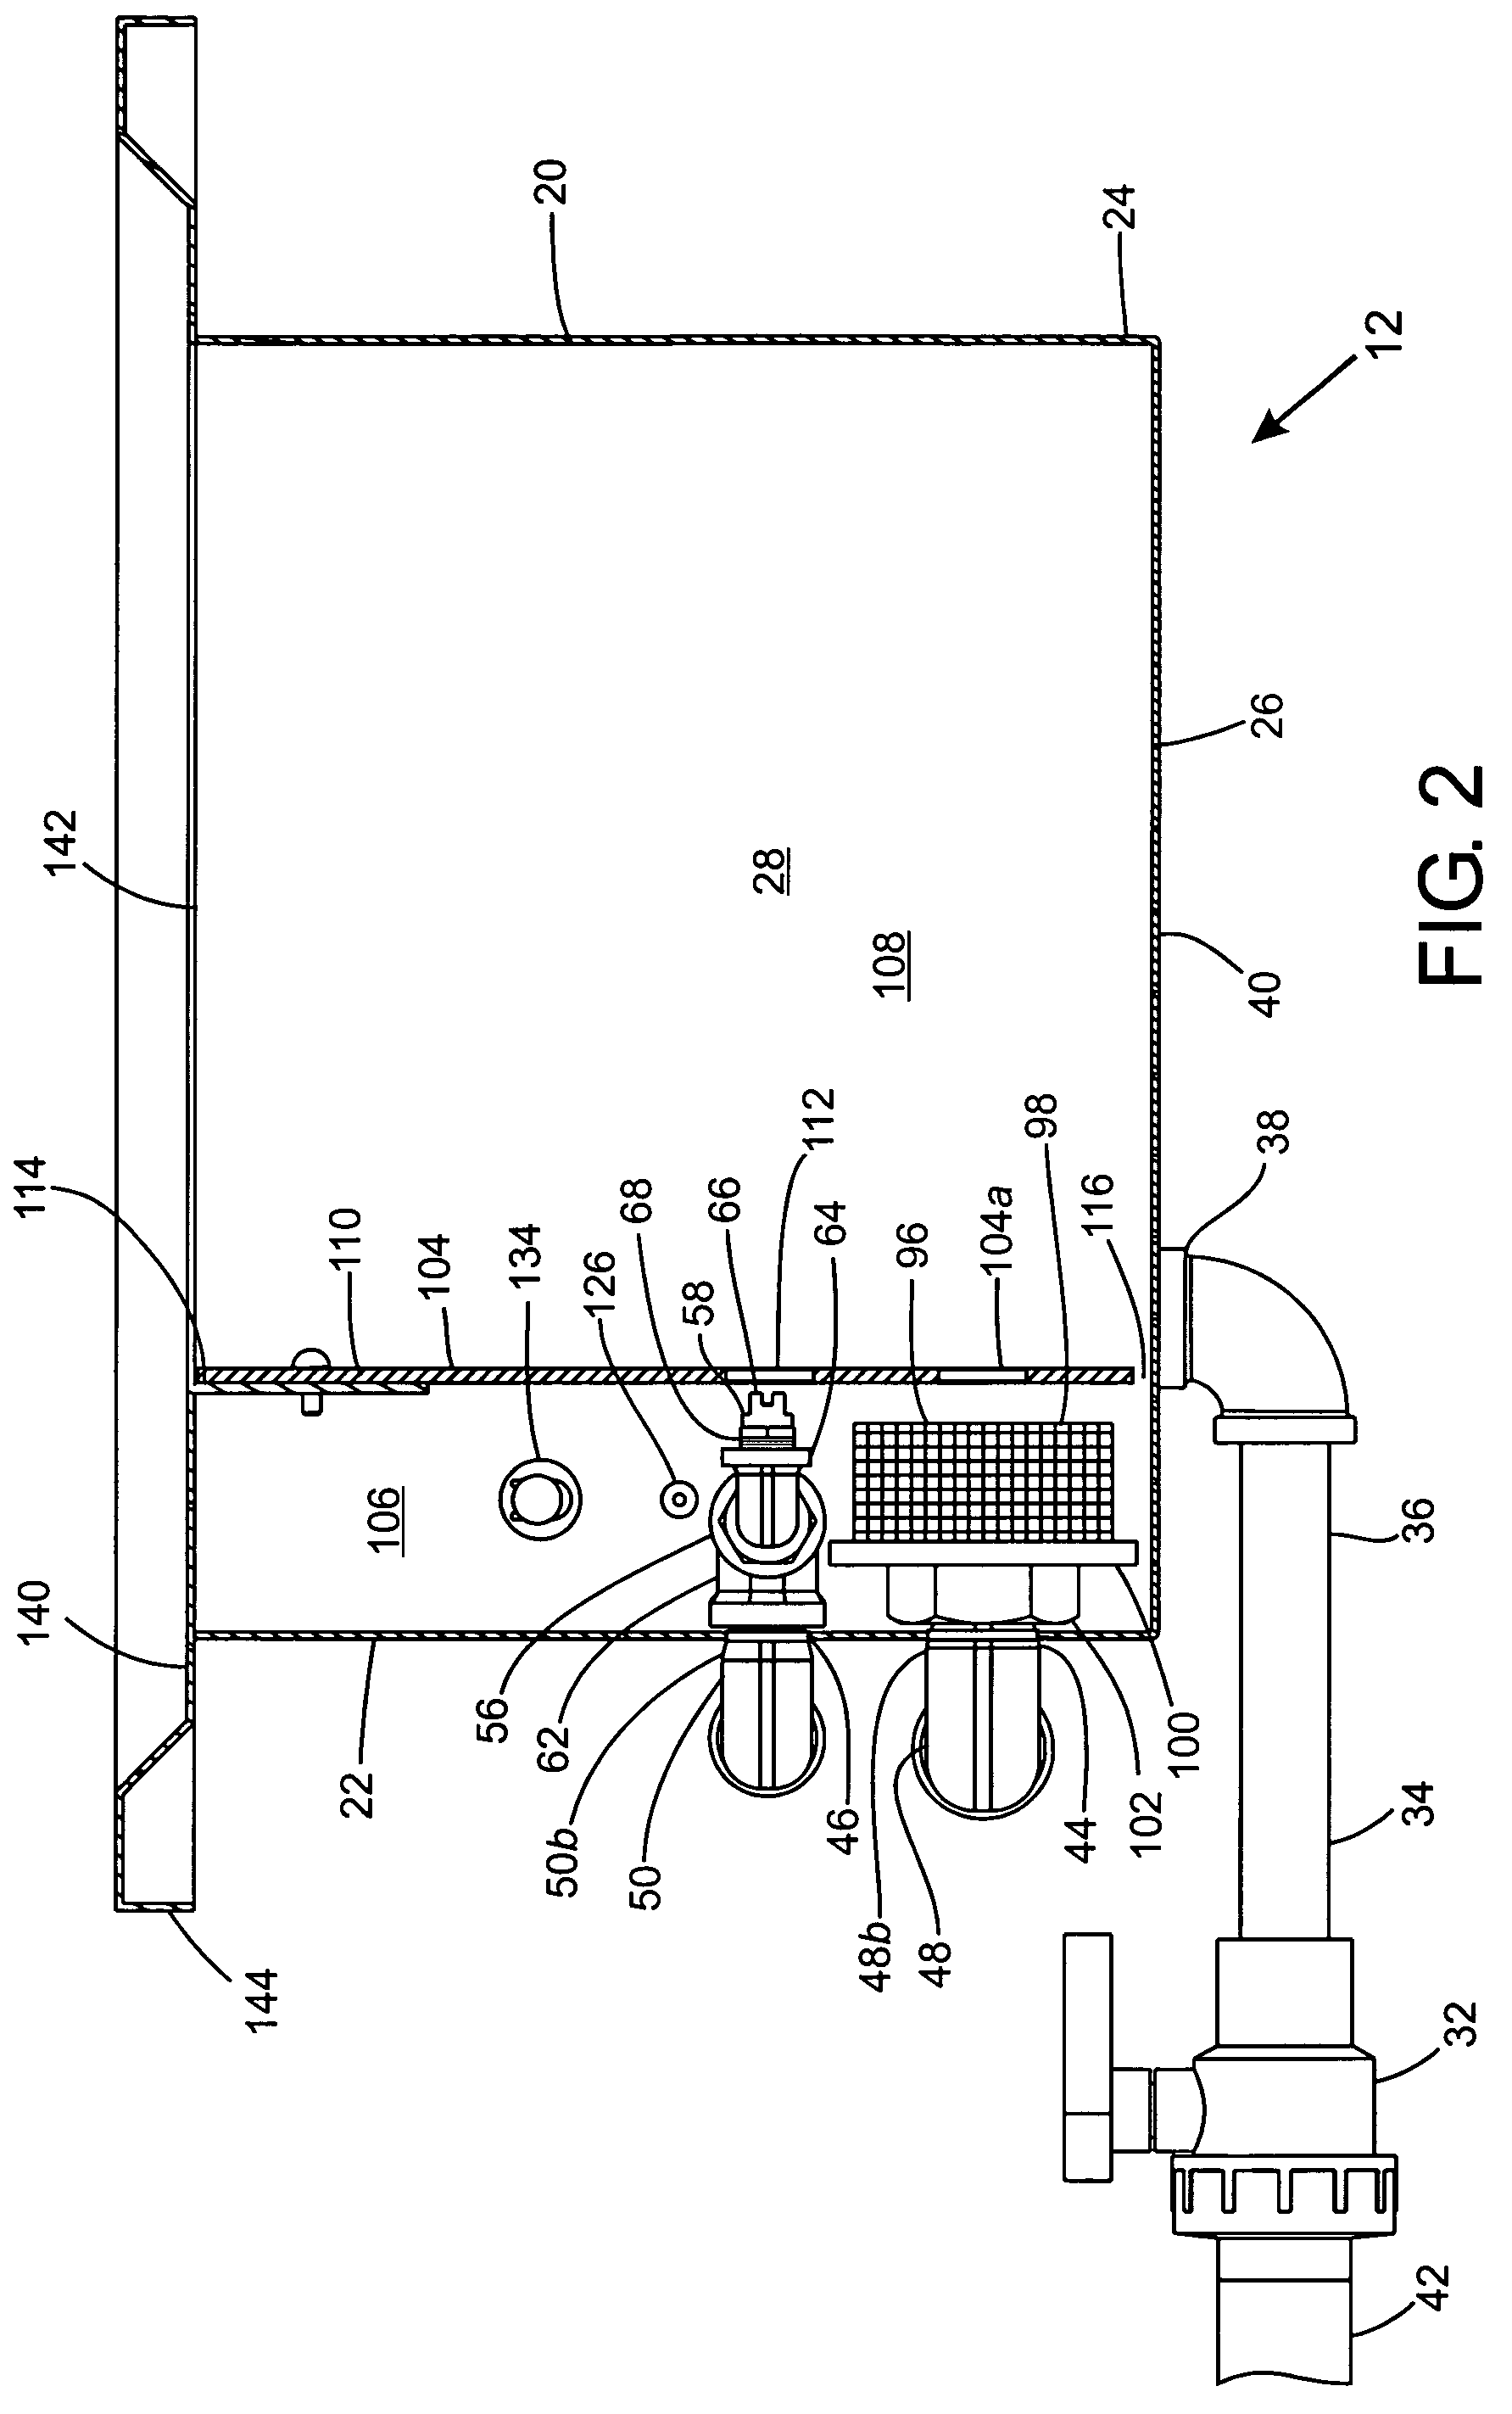 Apparatus and method of removing water soluble support material from a rapid prototype part